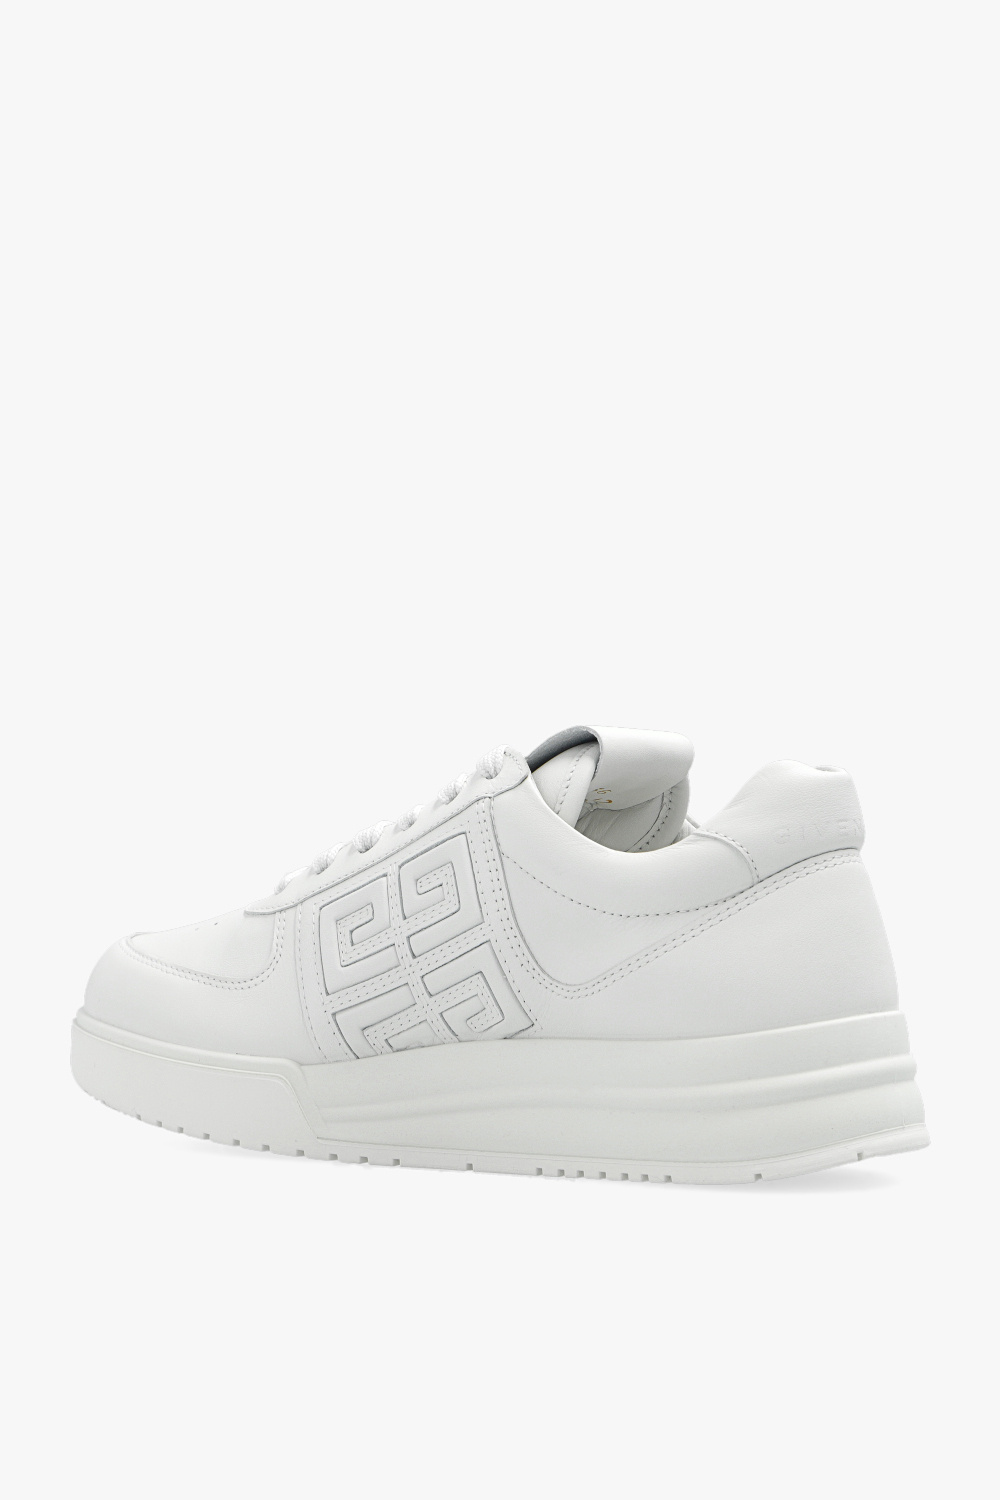 Givenchy Sneakers with logo